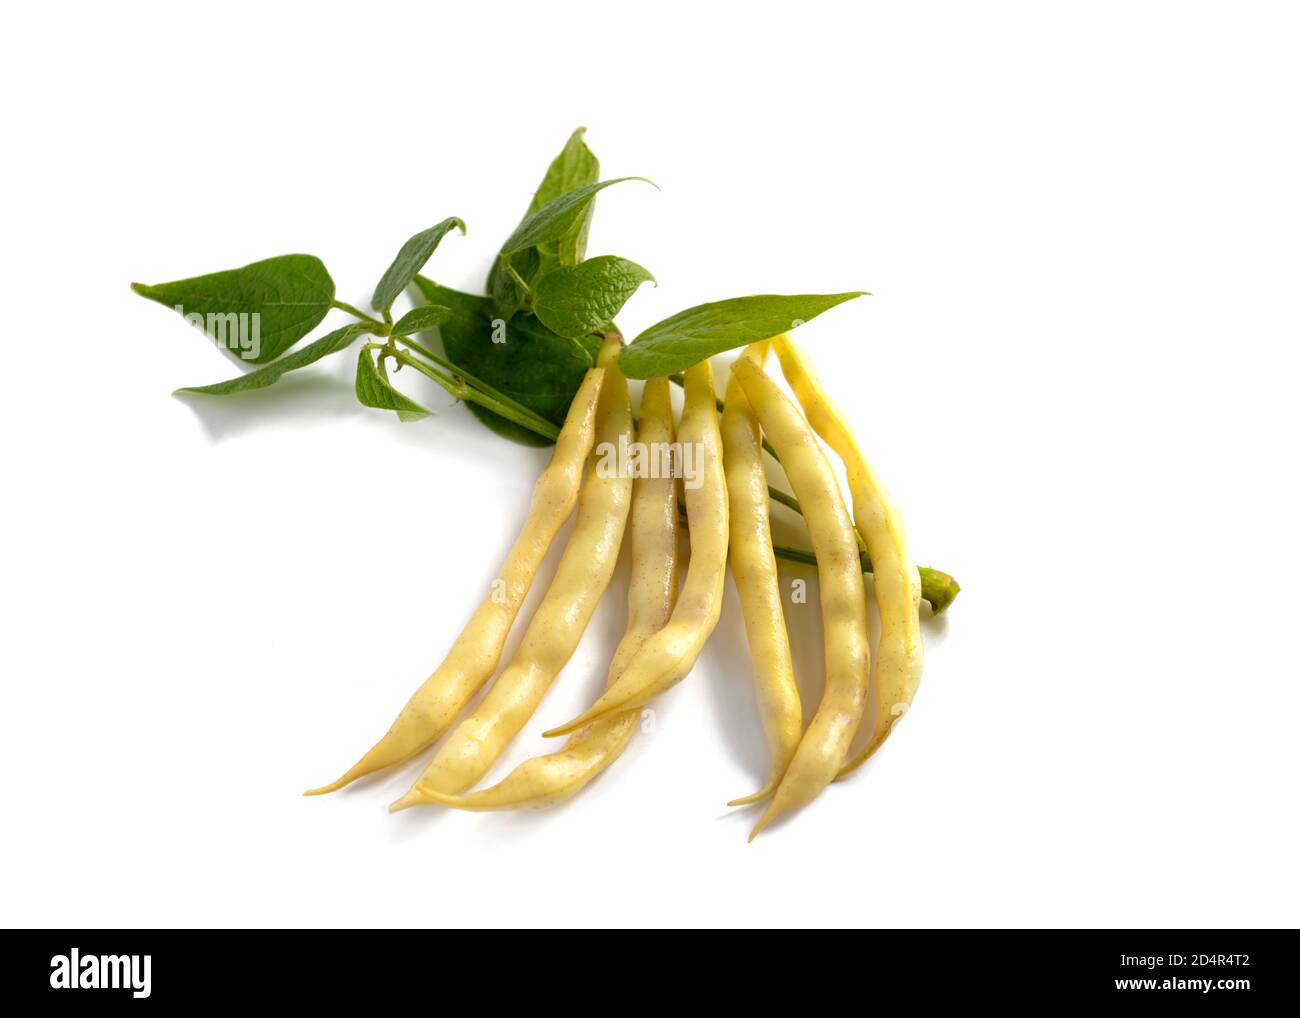 french wax beans isolated on a white background close up with greenery Stock Photo